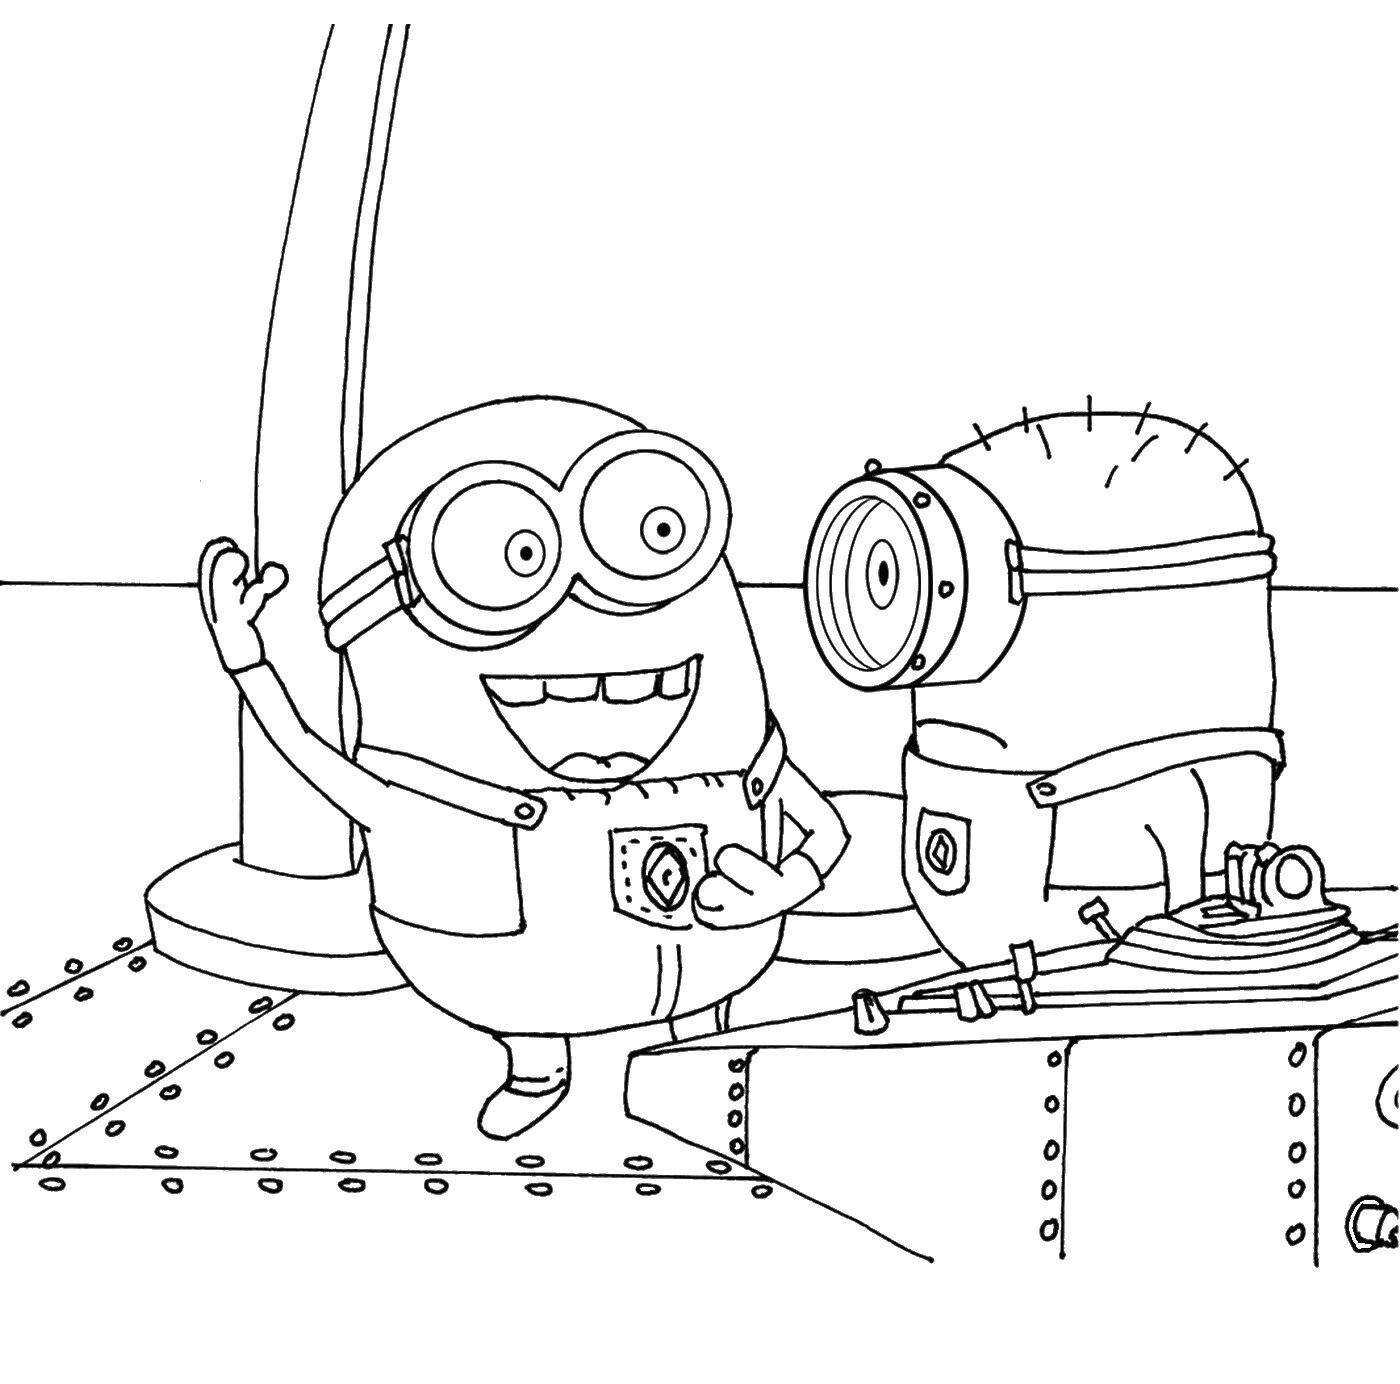 despicable me 2 coloring pages